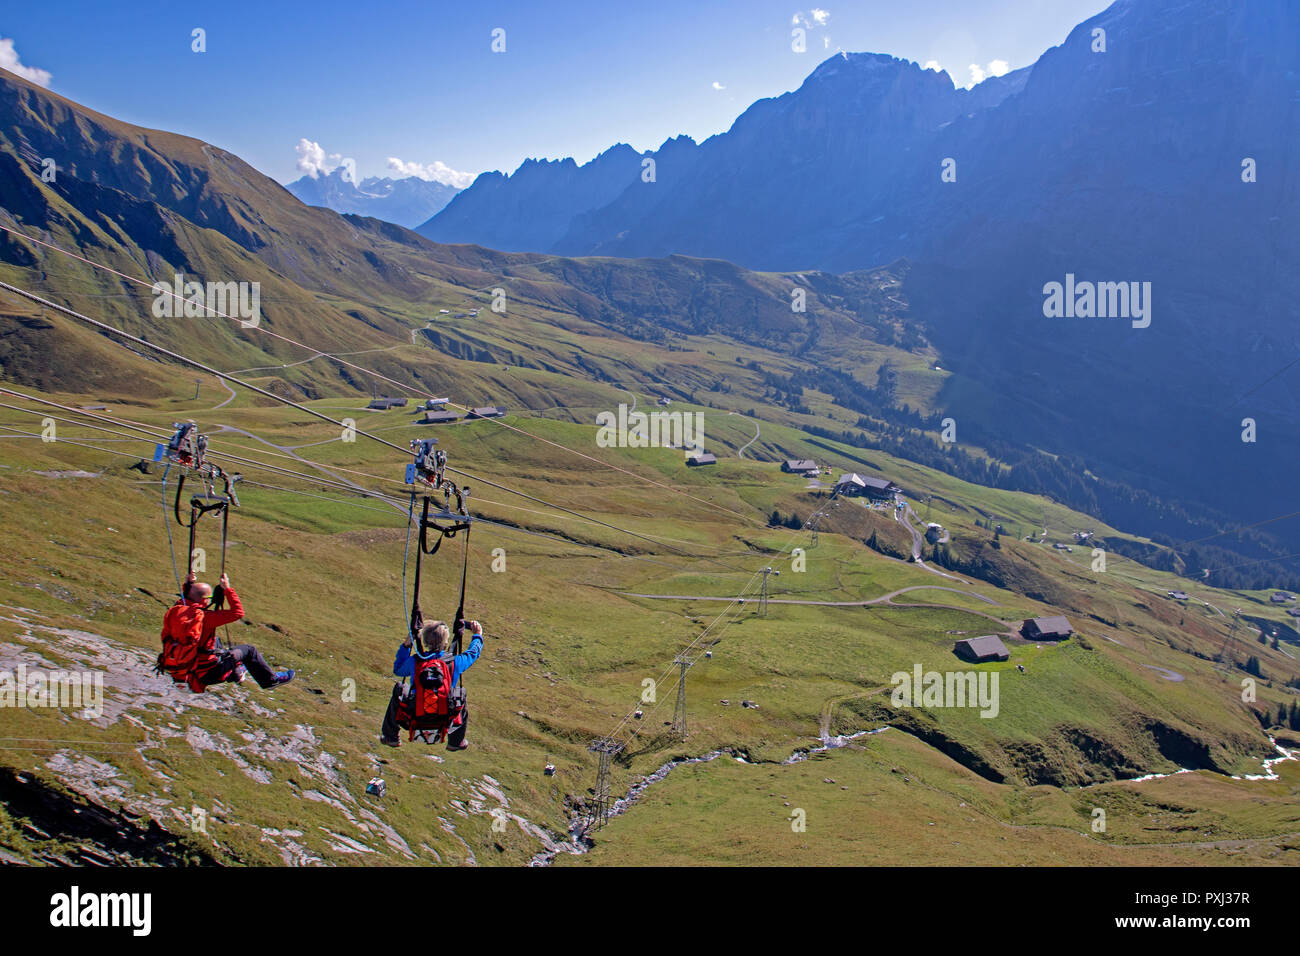 The First Flyer zipline above Grindelwald Stock Photo